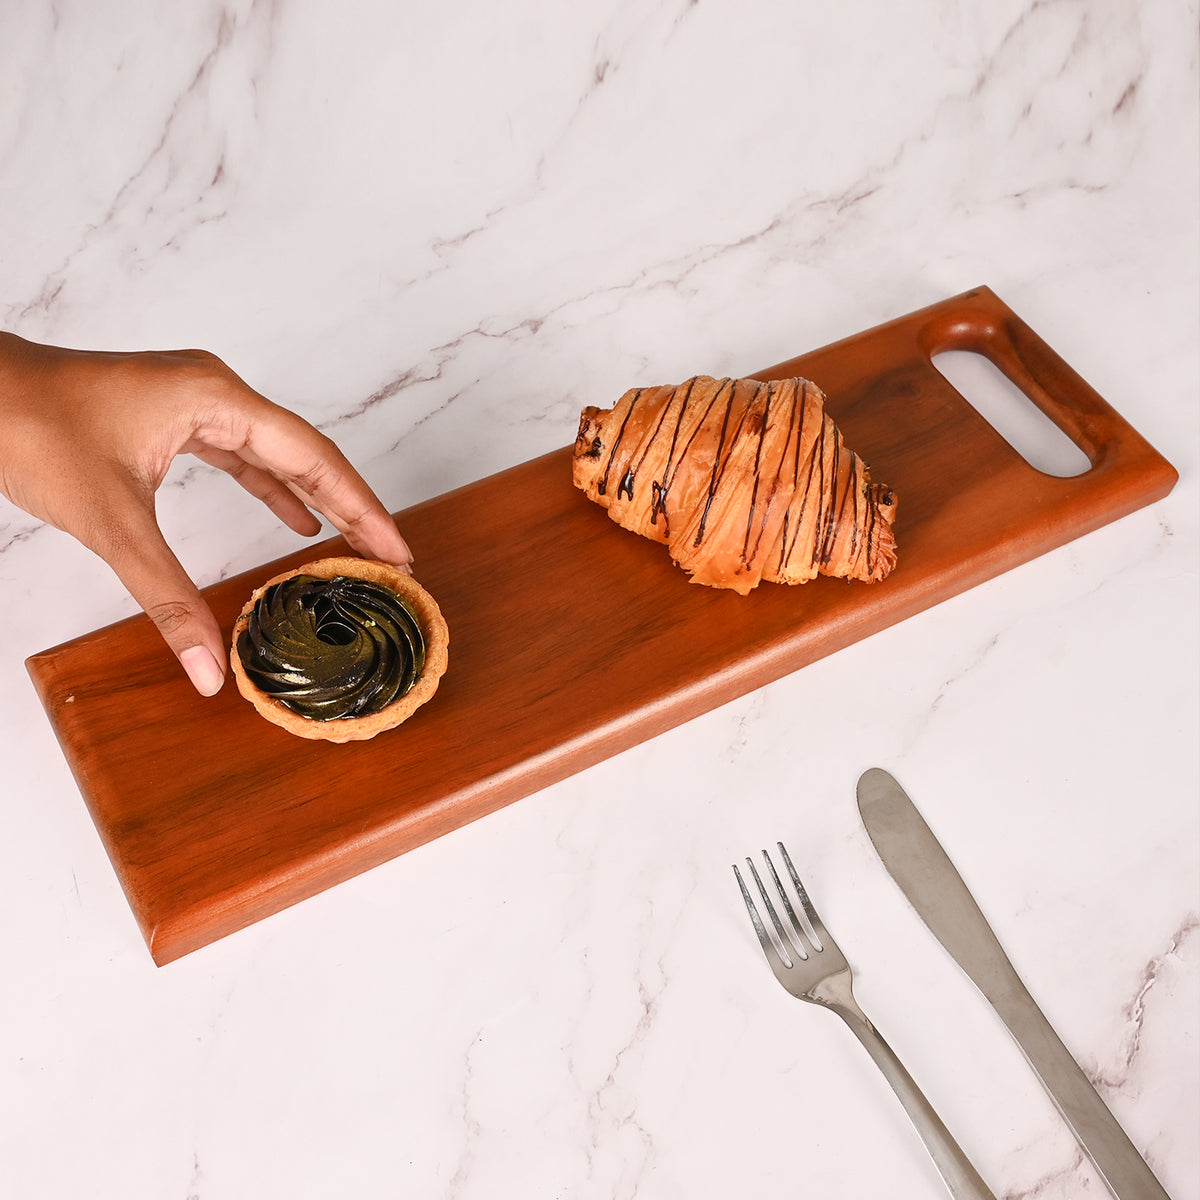 Wooden long platter, plate, and server with handle | multipurpose wooden platter